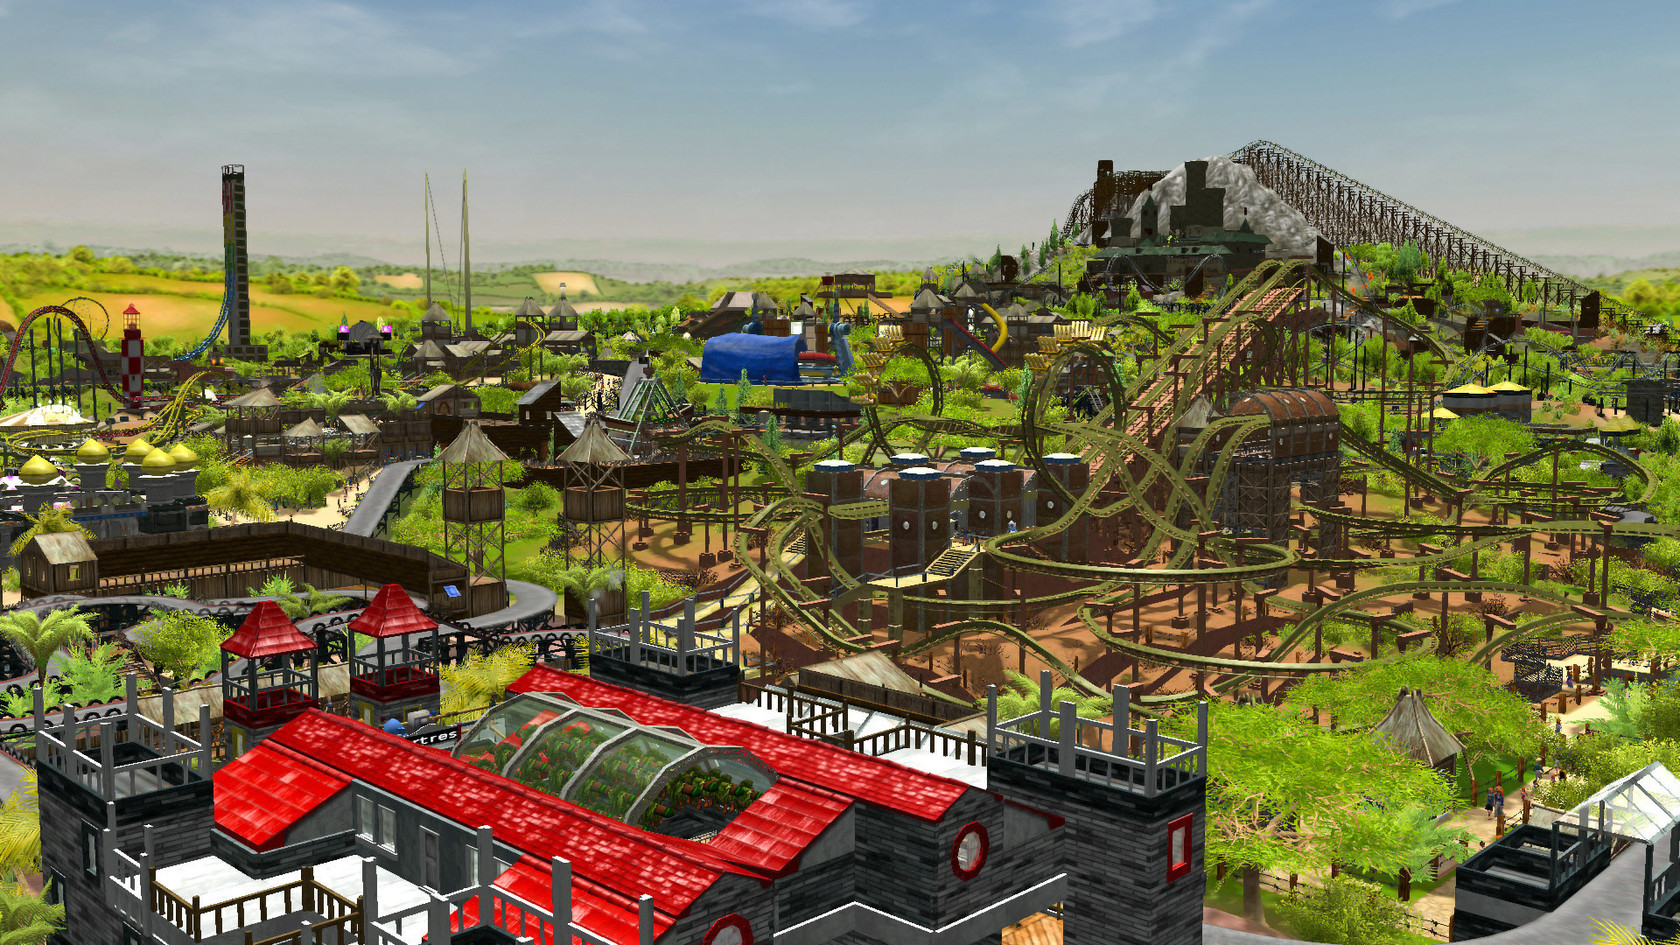 rollercoaster tycoon 3 for mac download free